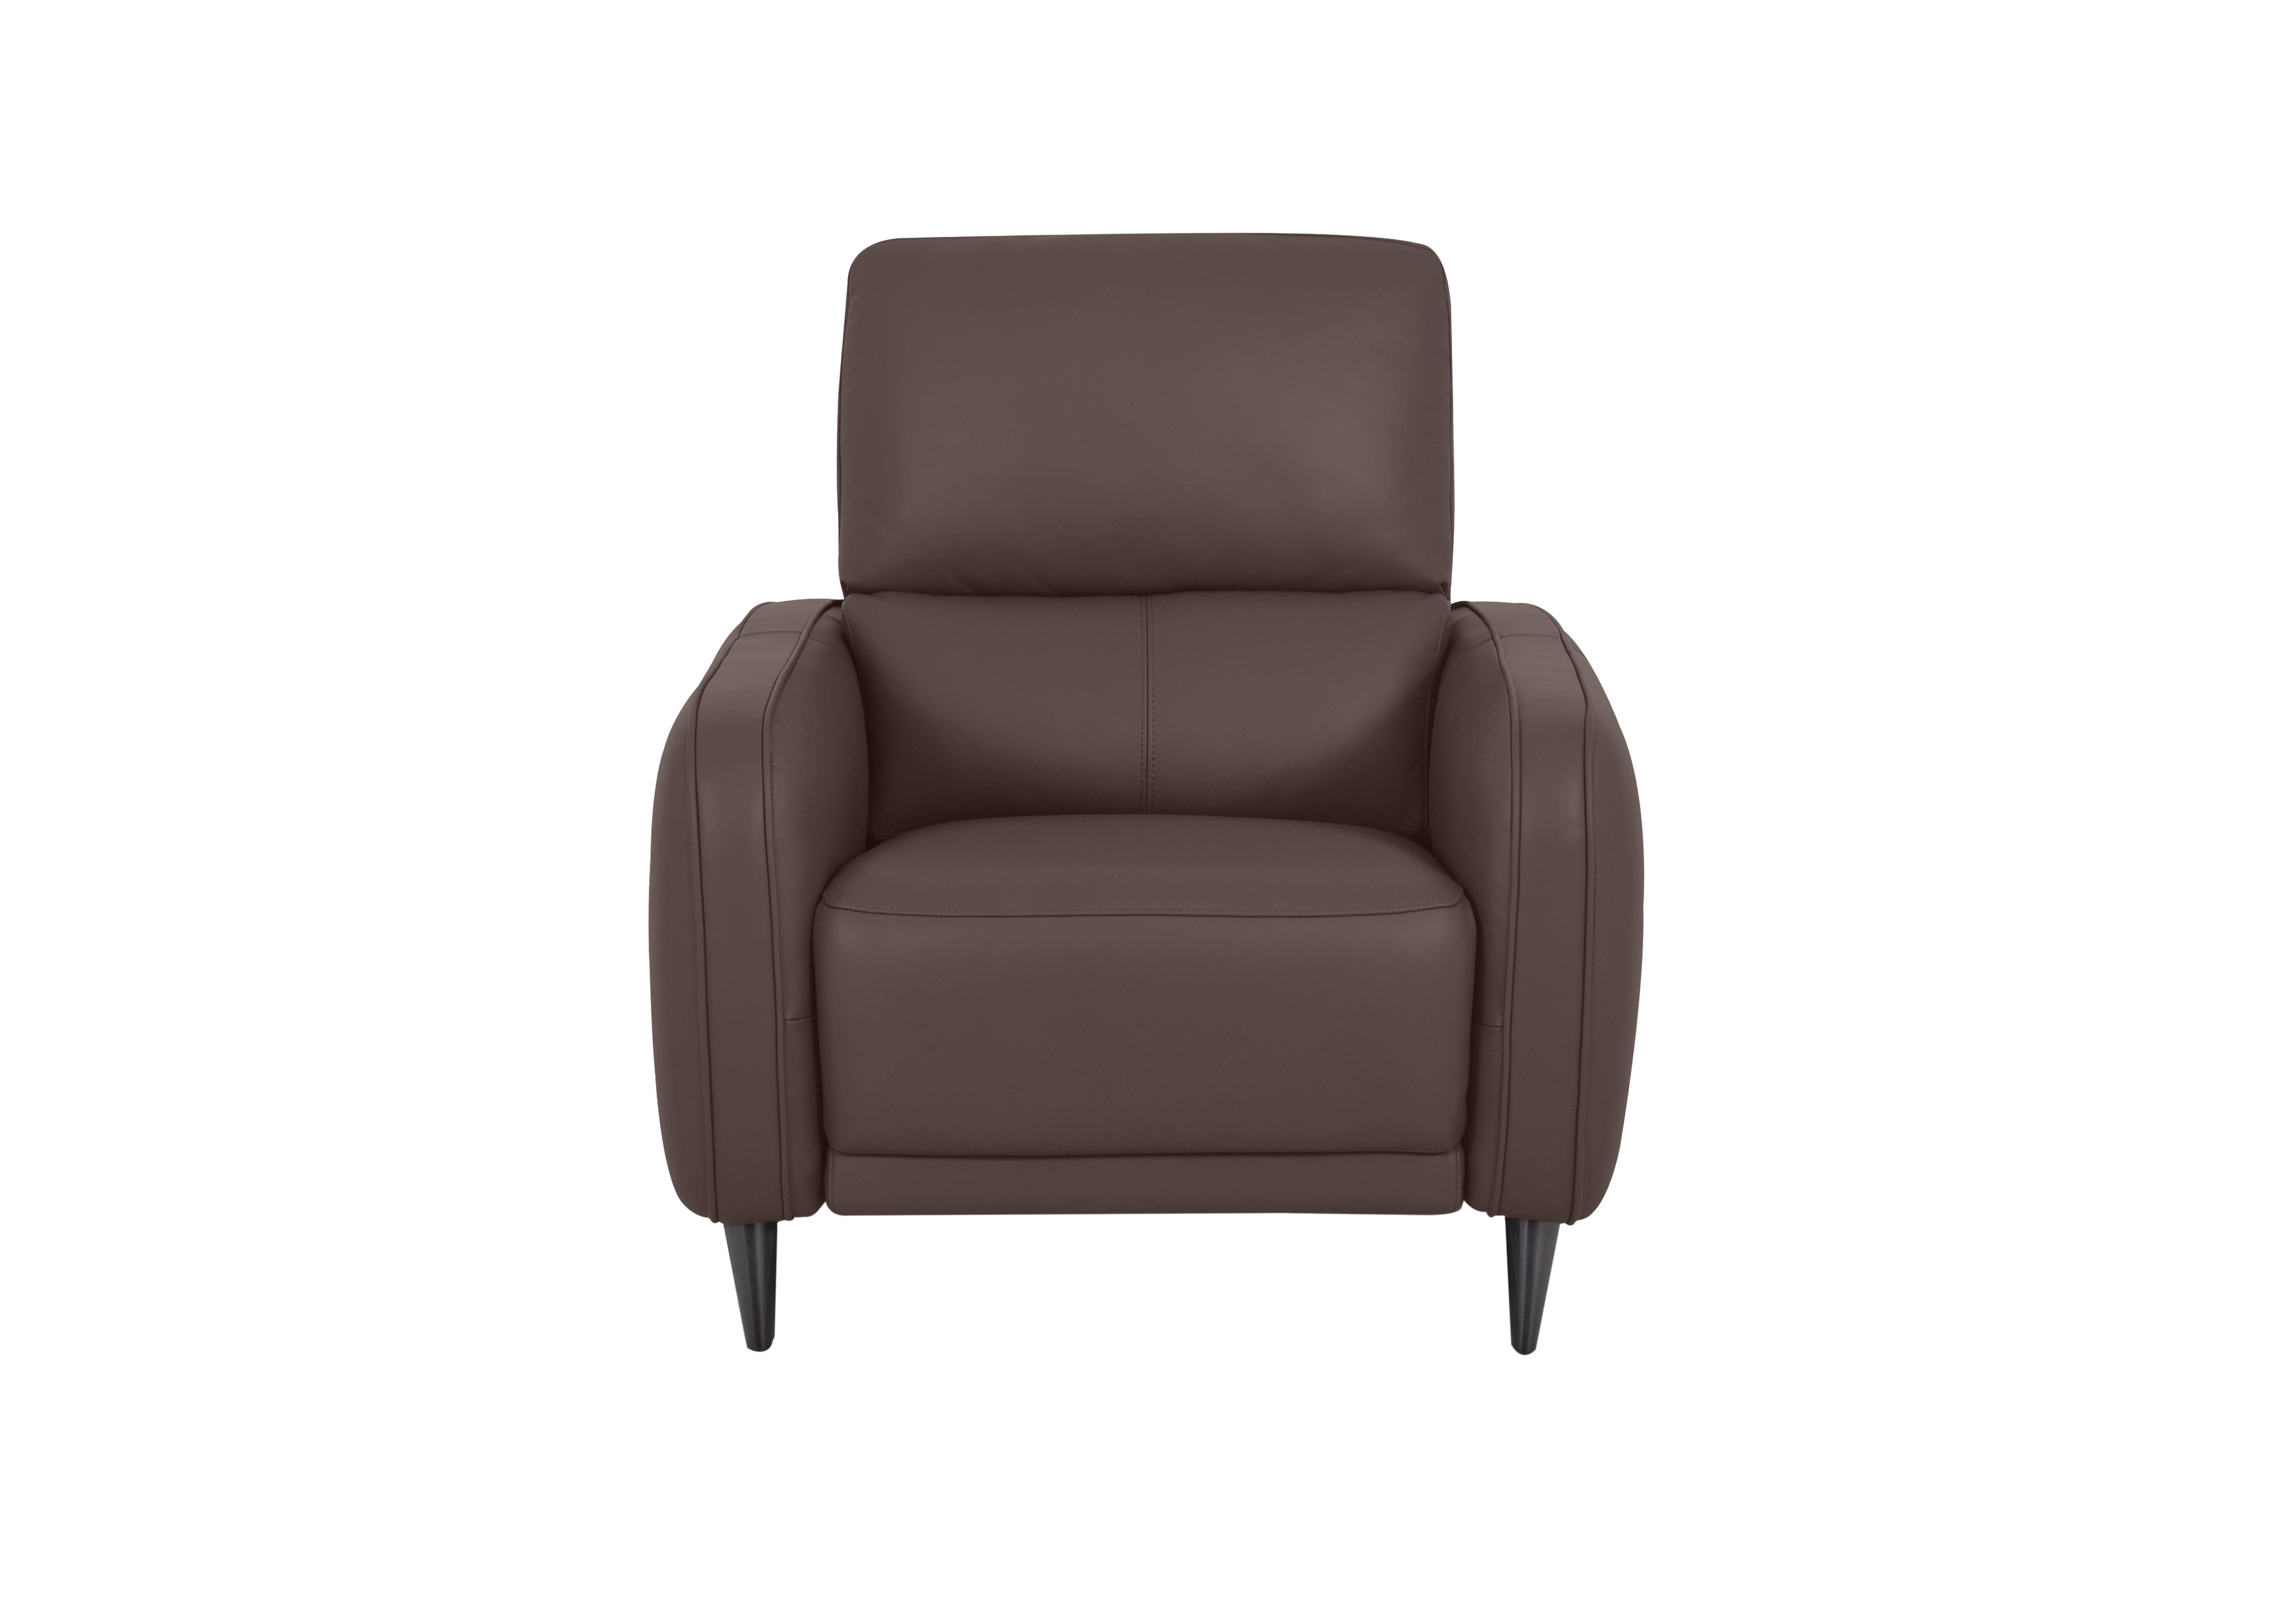 Logan Leather Chair in Nn-512e Cacao Brown on Furniture Village